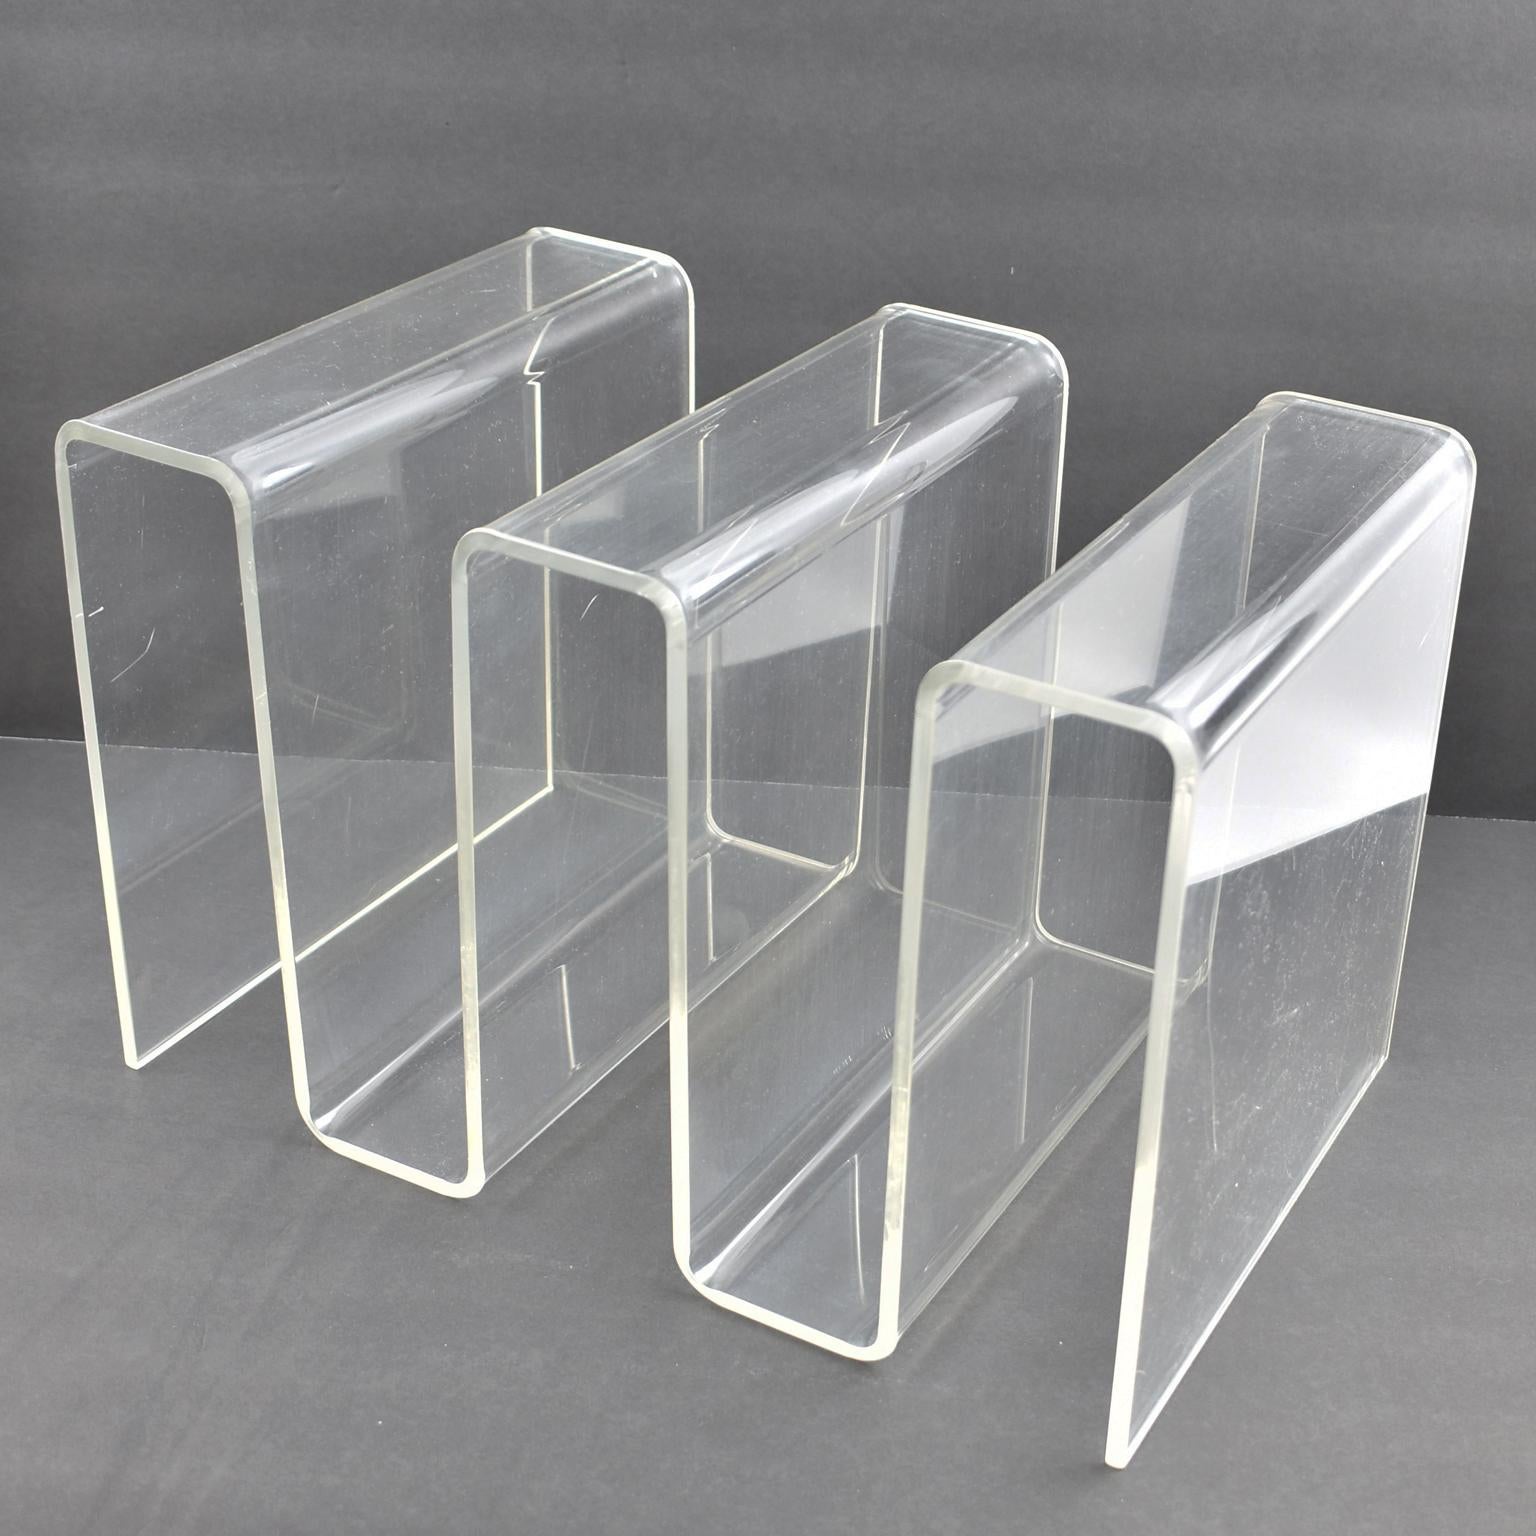 Incredible French 1970s Lucite magazine rack, stand, or holder. Versatile use in either a horizontal or upright position. It can also be used as a desk accessory letter holder. Large thick Lucite construction with wavy zig-zag shape. Great accessory